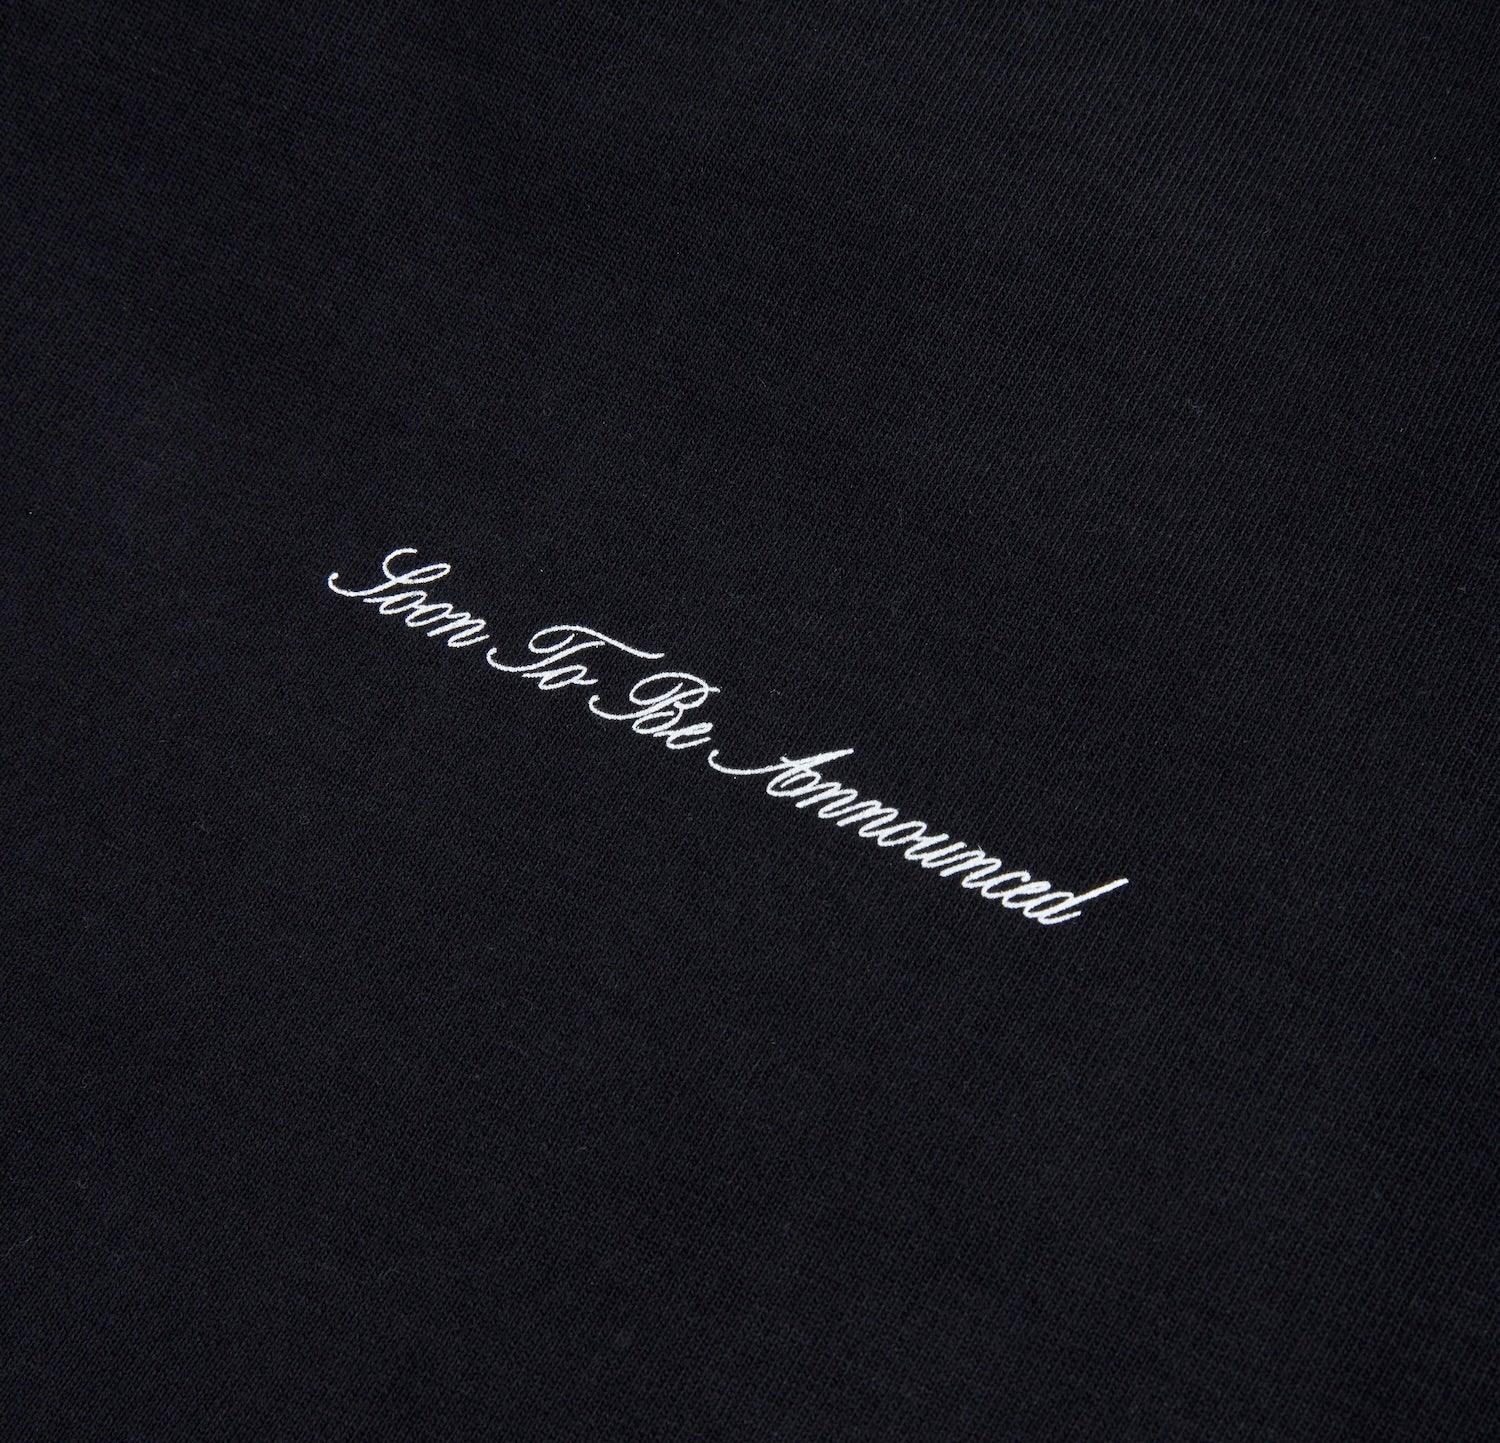 Logo Crest L/S T-Shirt - SOON TO BE ANNOUNCED